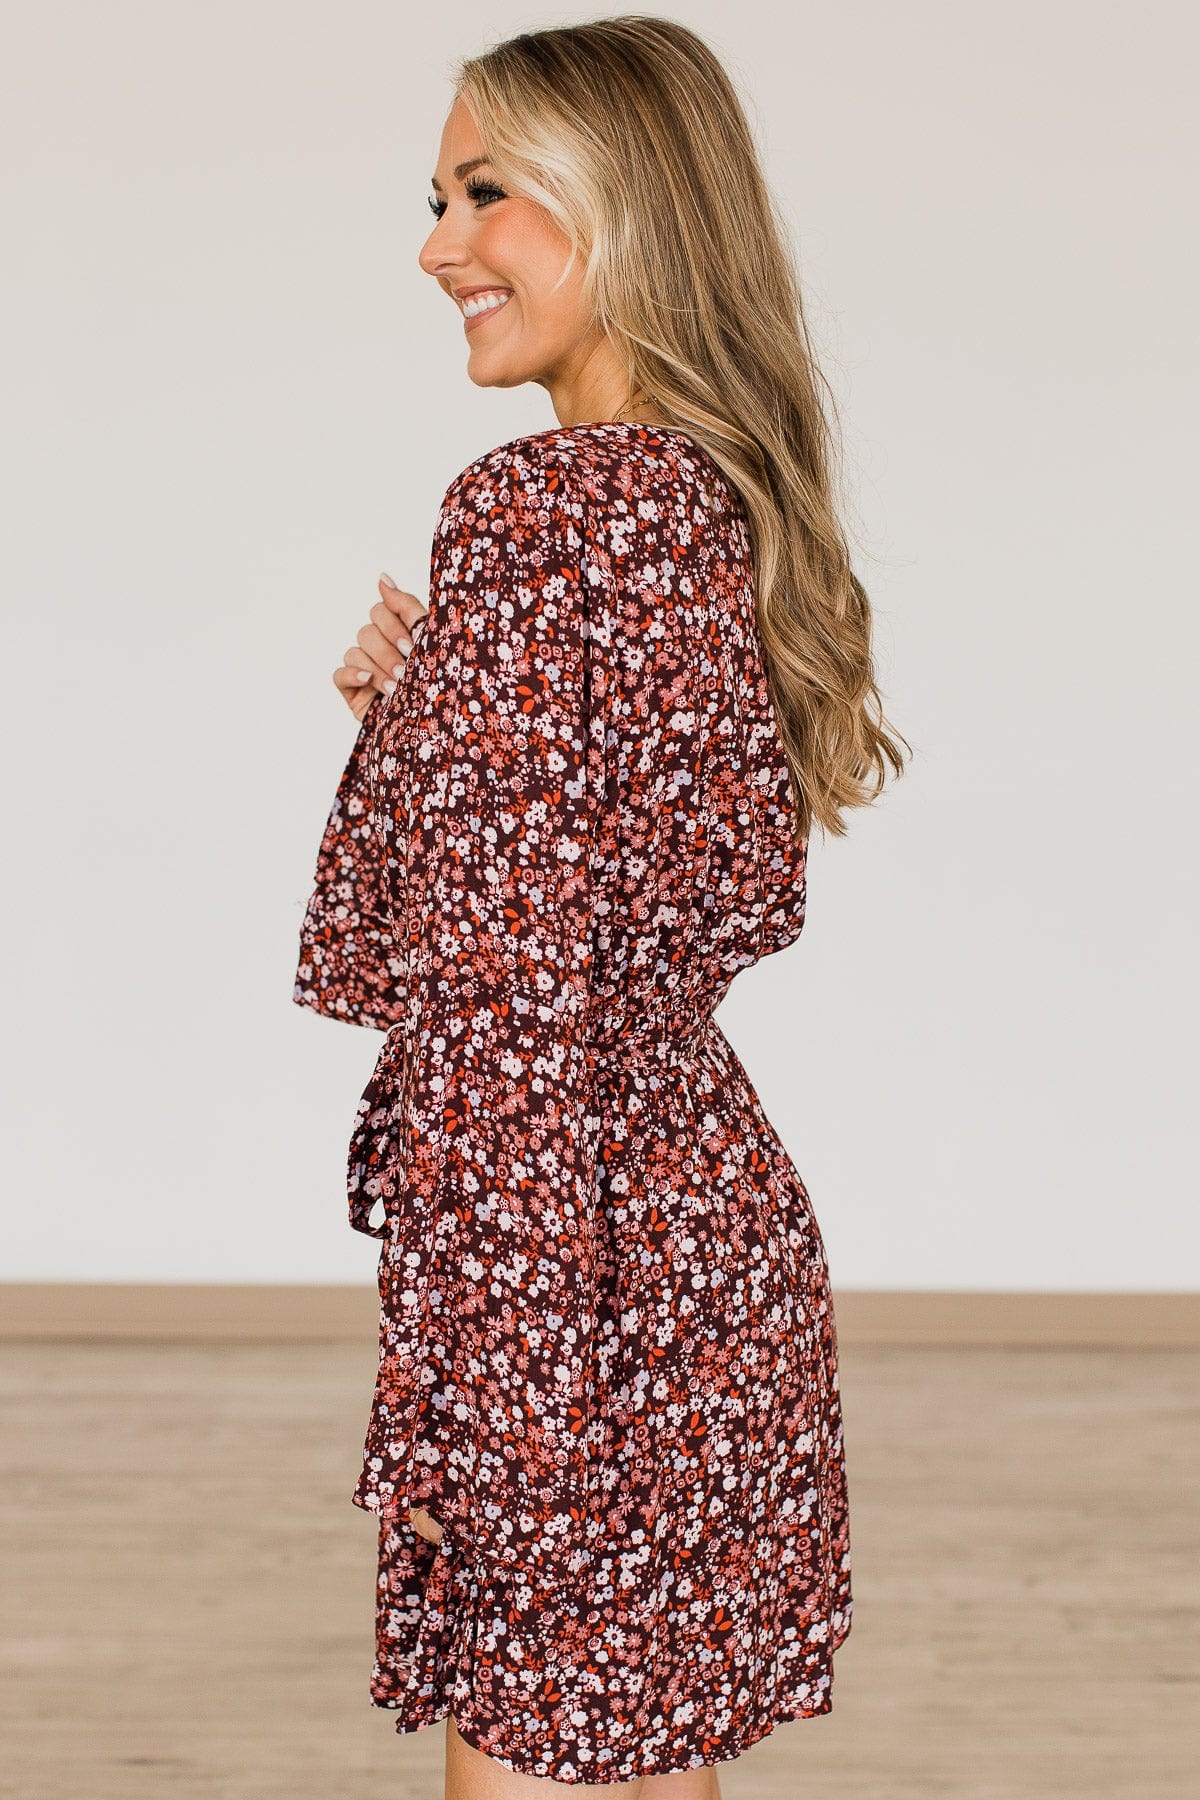 Live Your Dreams Floral Dress- Maroon